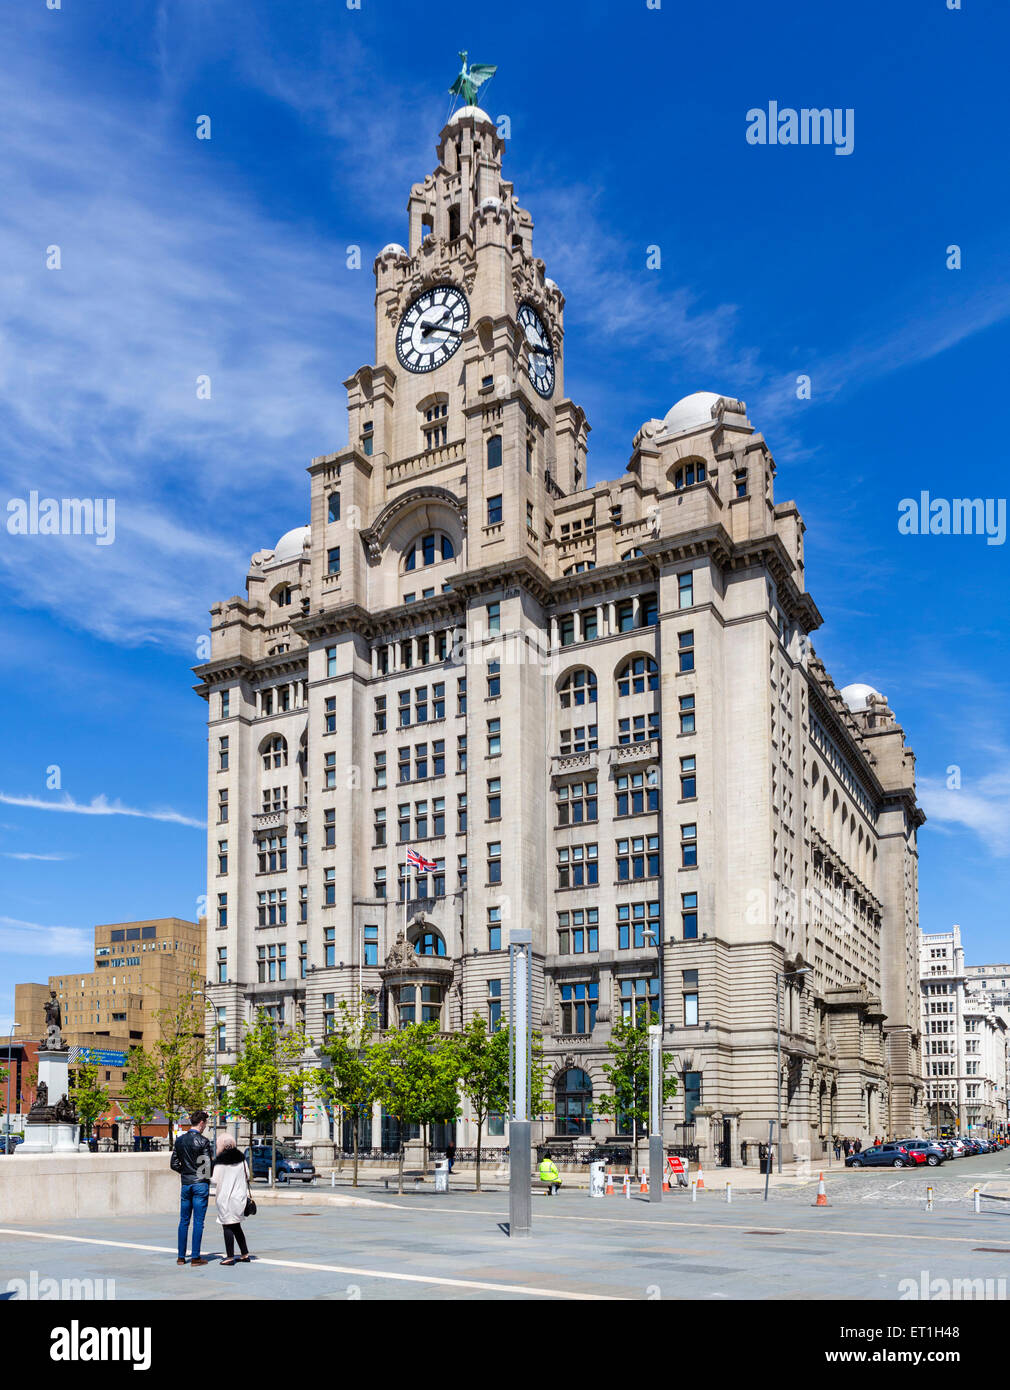 The Royal Liver Building, one of the 'Three Graces', Pier Head, Liverpool, Merseyside, England, UK Stock Photo